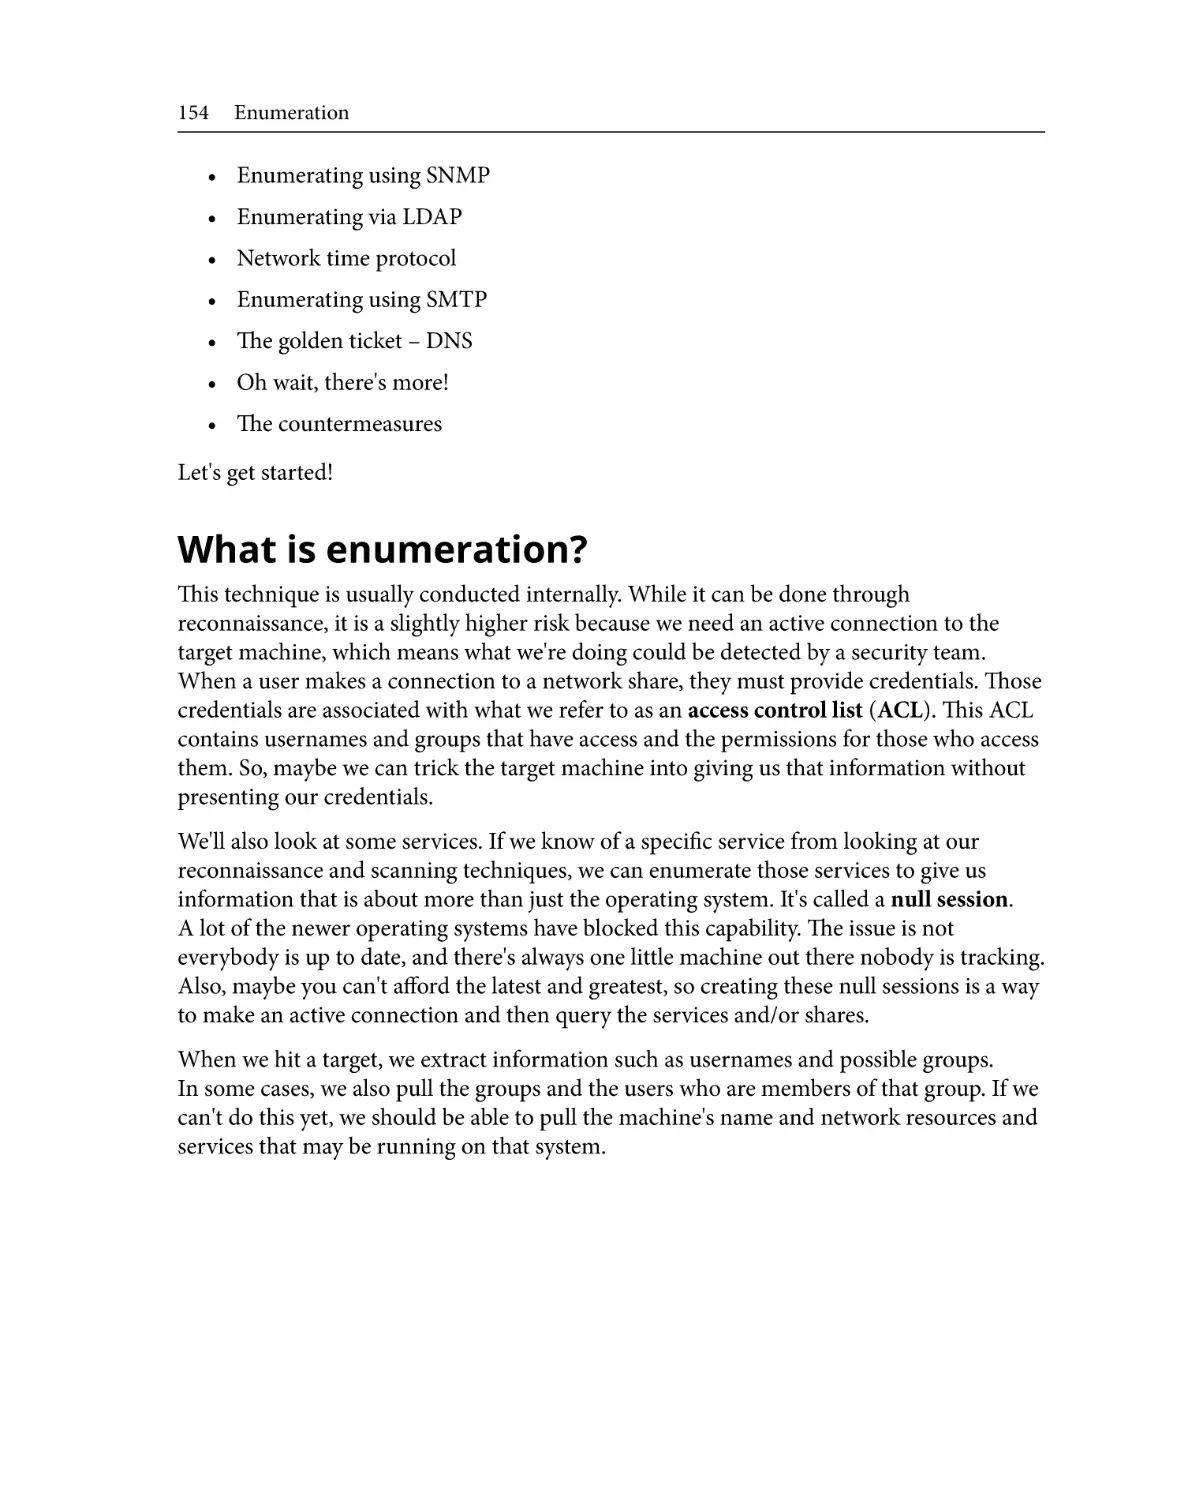 What is enumeration?